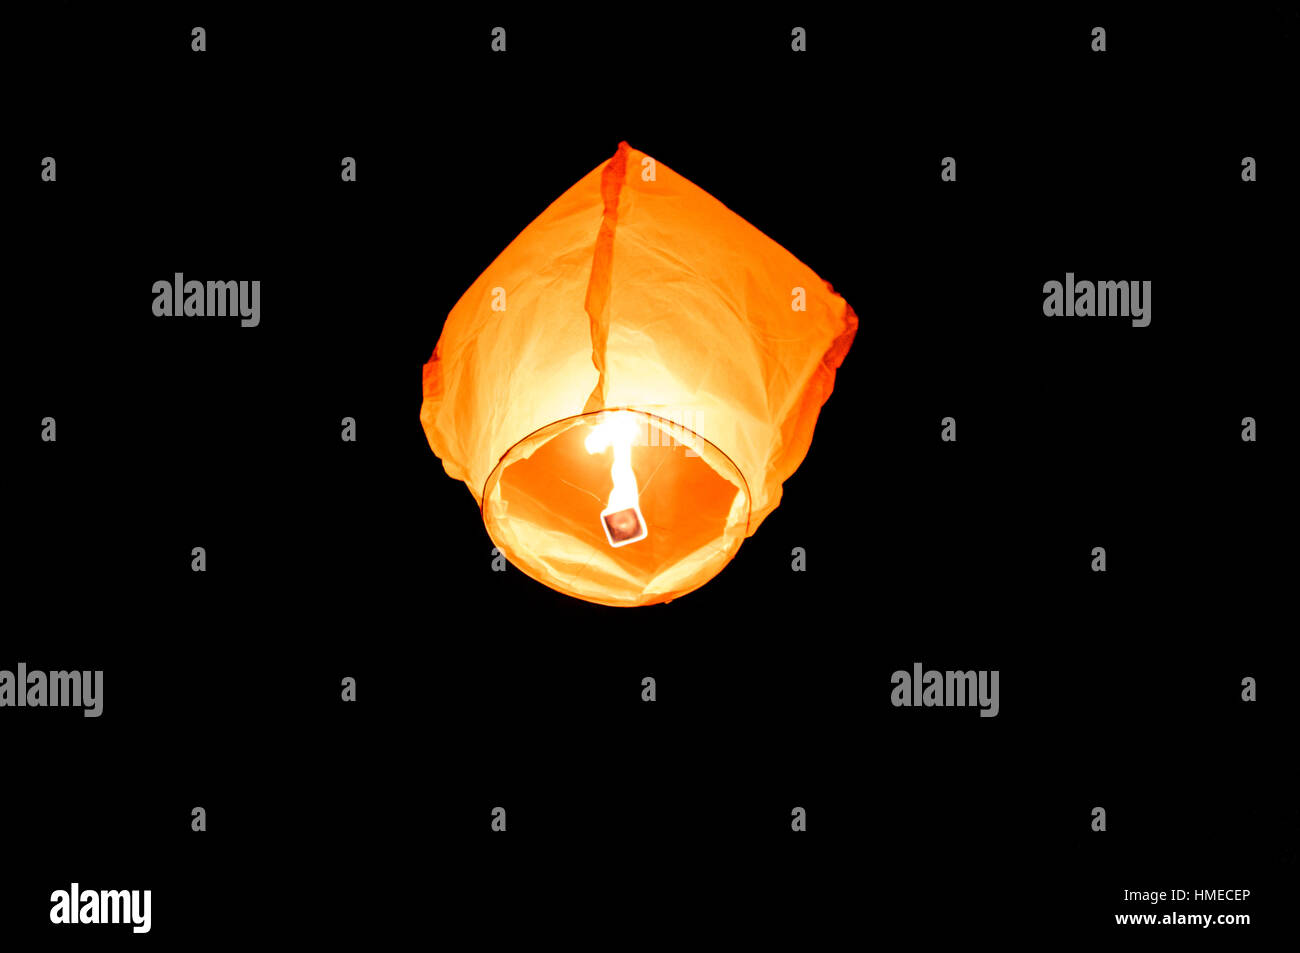 Orange paper sky flaming lantern, flying lantern, floating lantern, hot-air balloon is flying with a candle flame in the night. Popular Celebration or Stock Photo